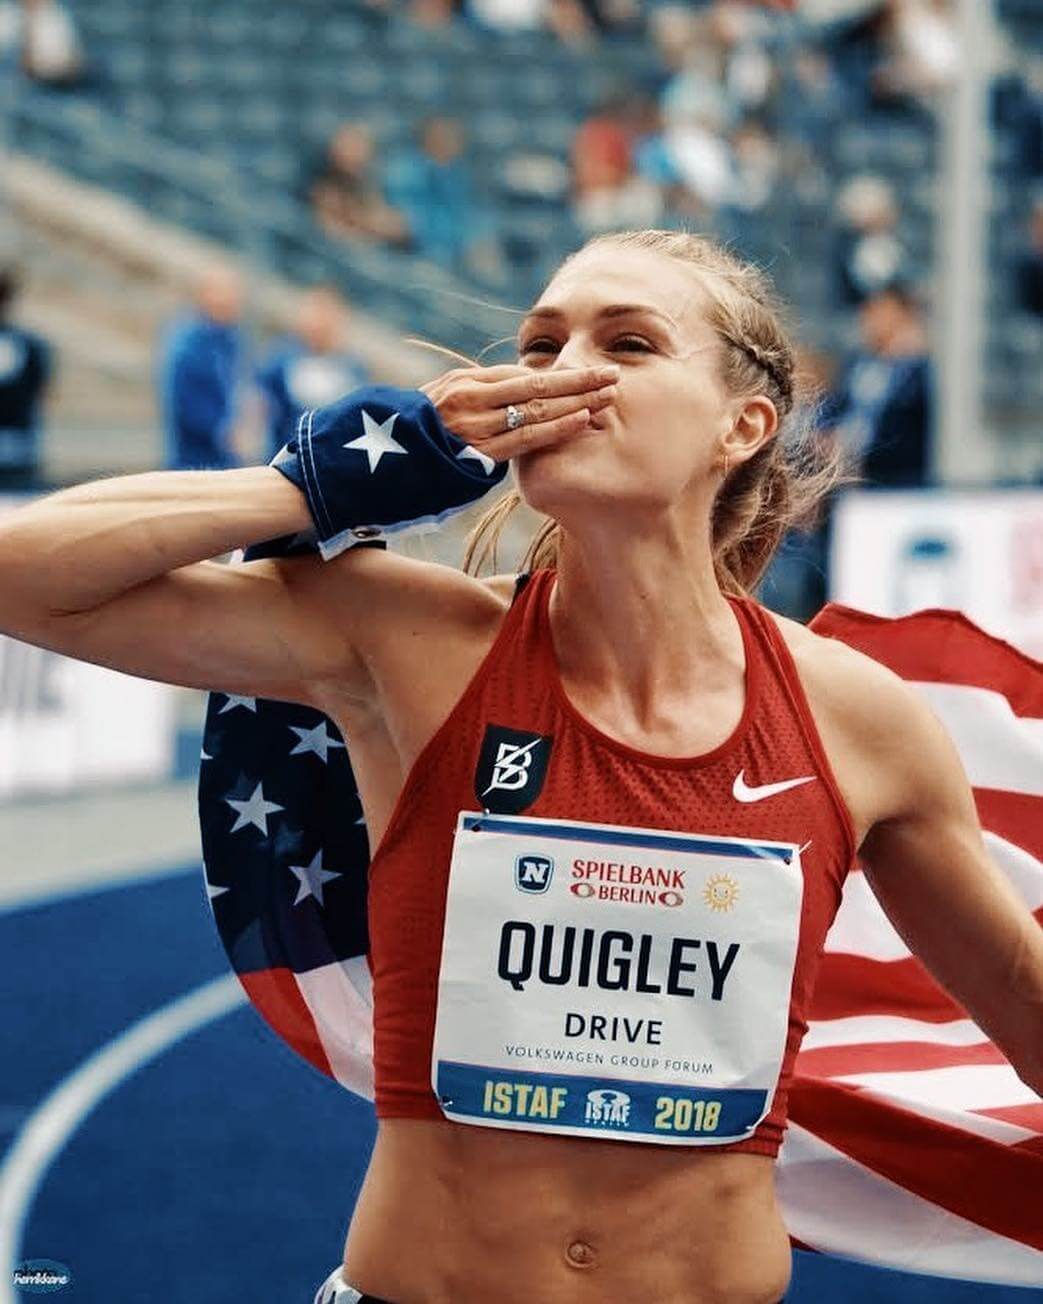 49 Hot Pictures Of Colleen Quigley Will Make You Fall In Love Instantly | Best Of Comic Books